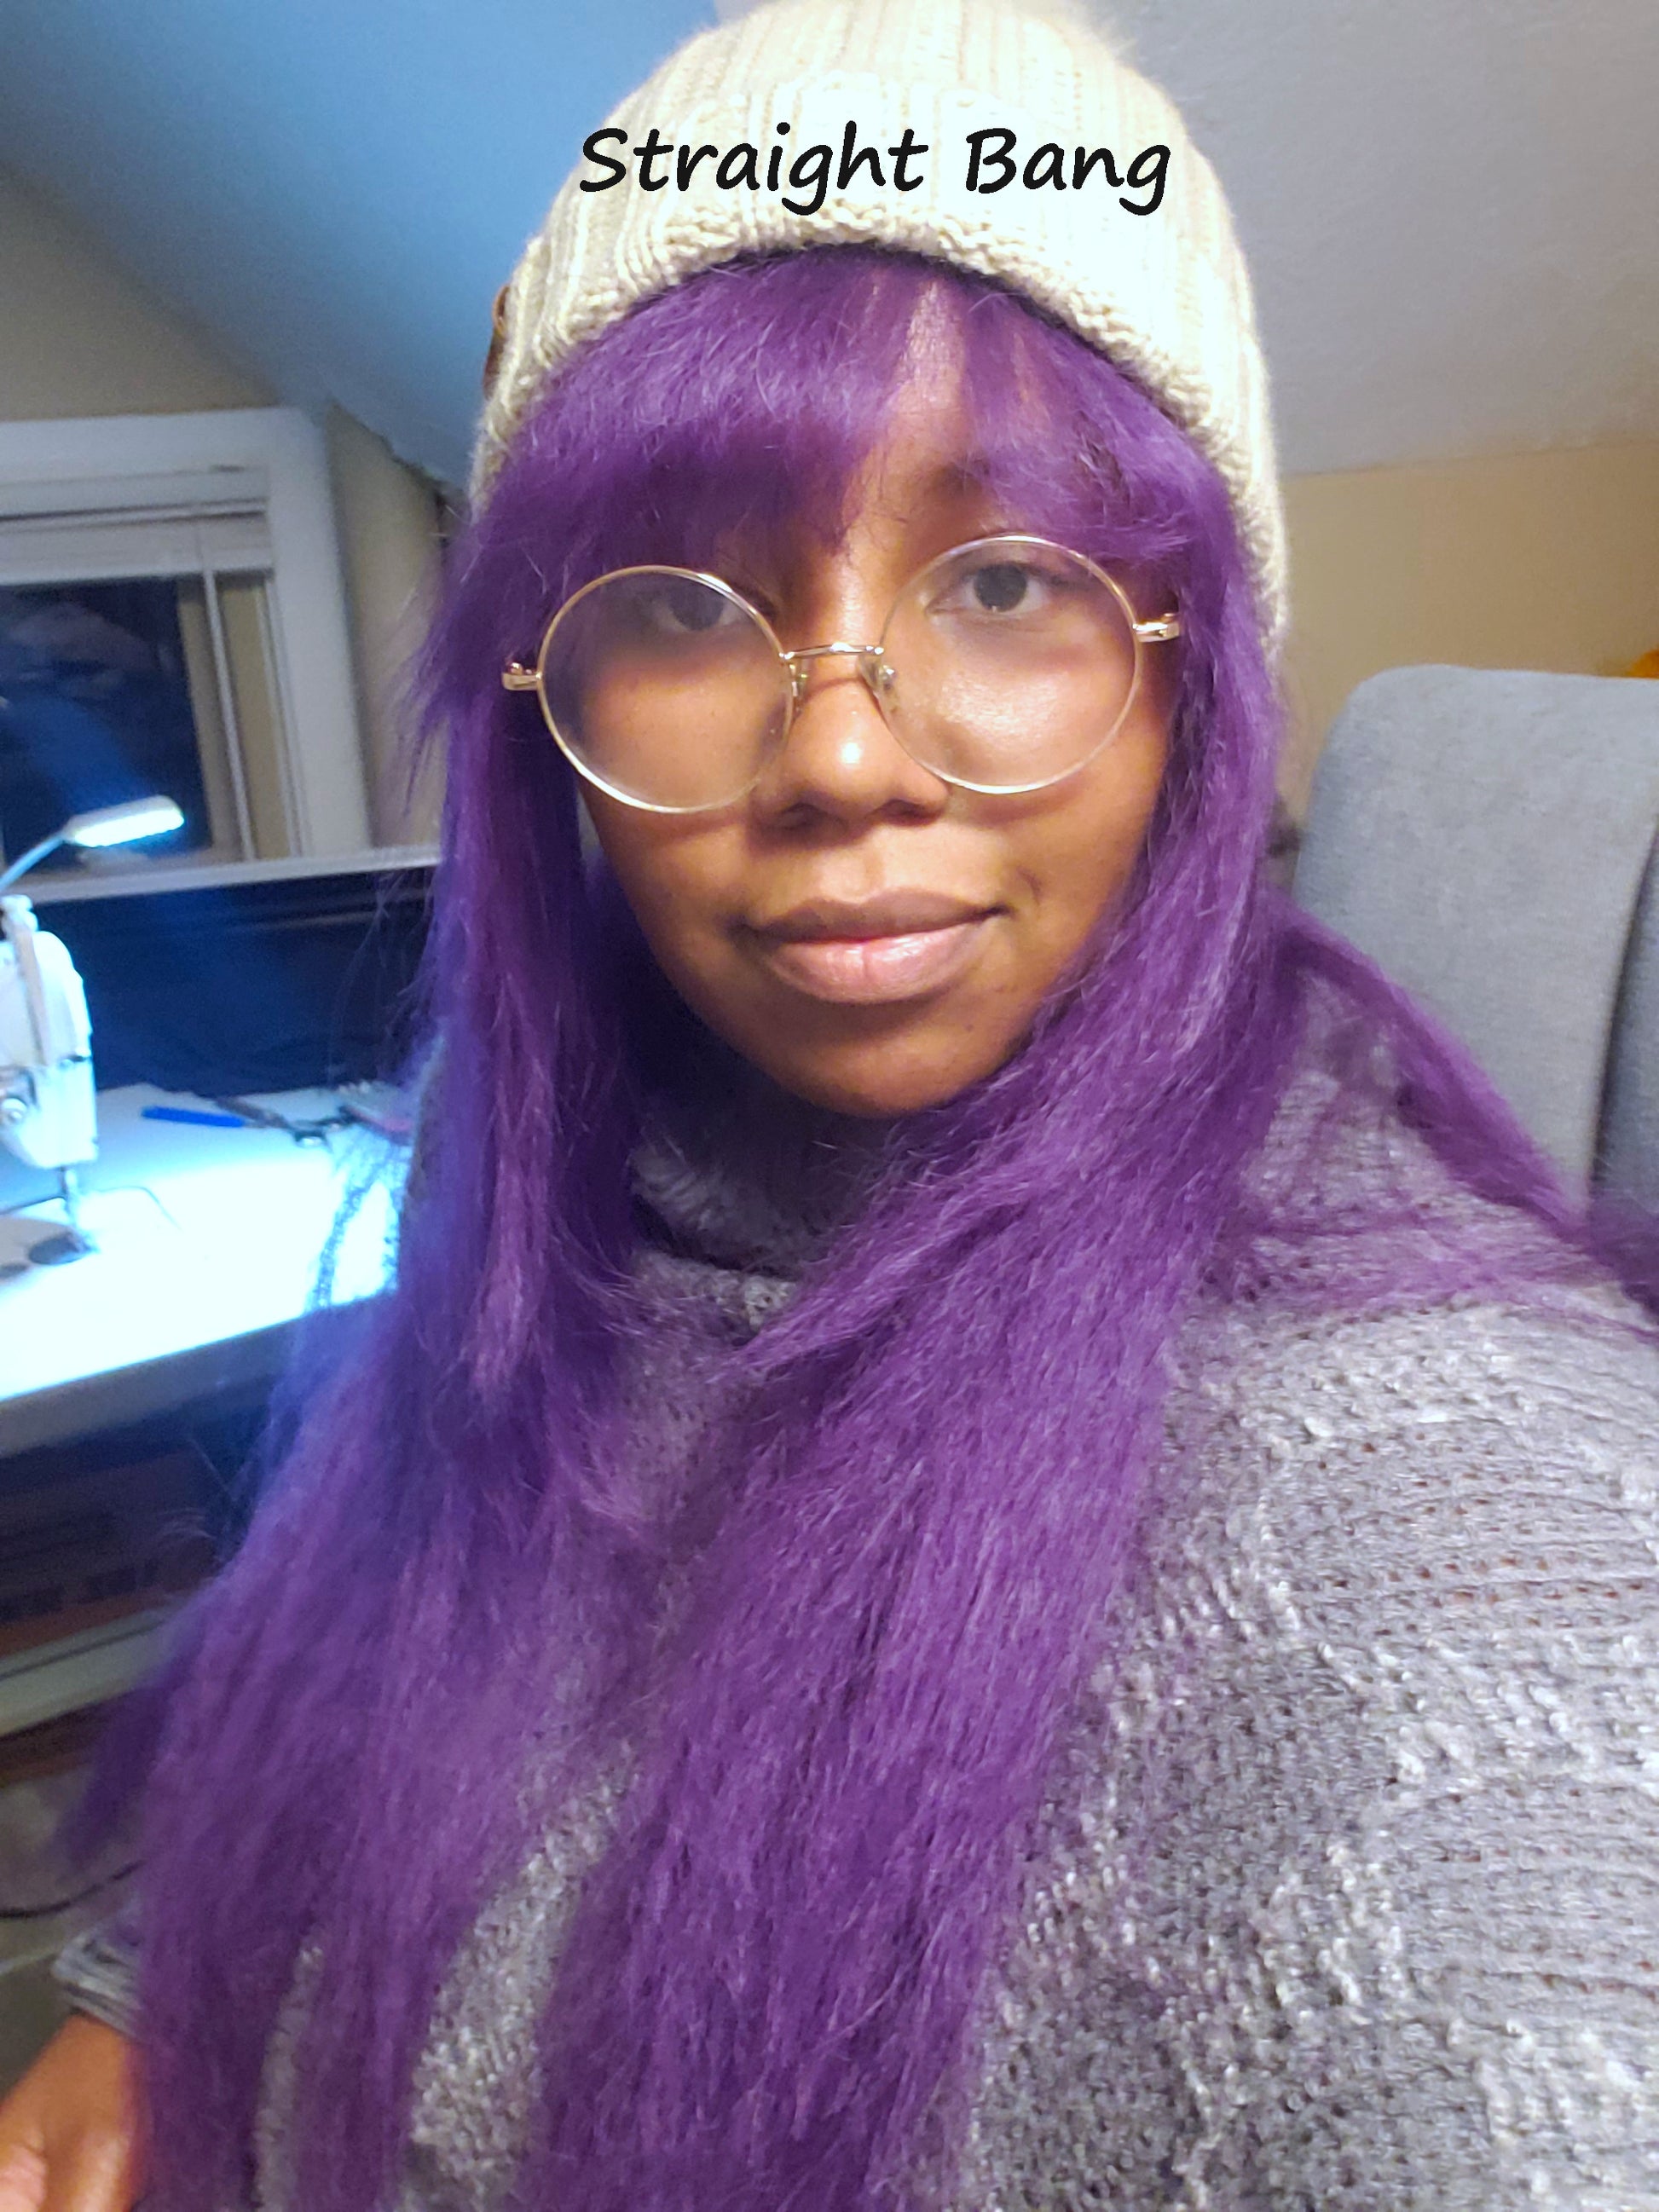 Example of straight bang on Purple Craze wig